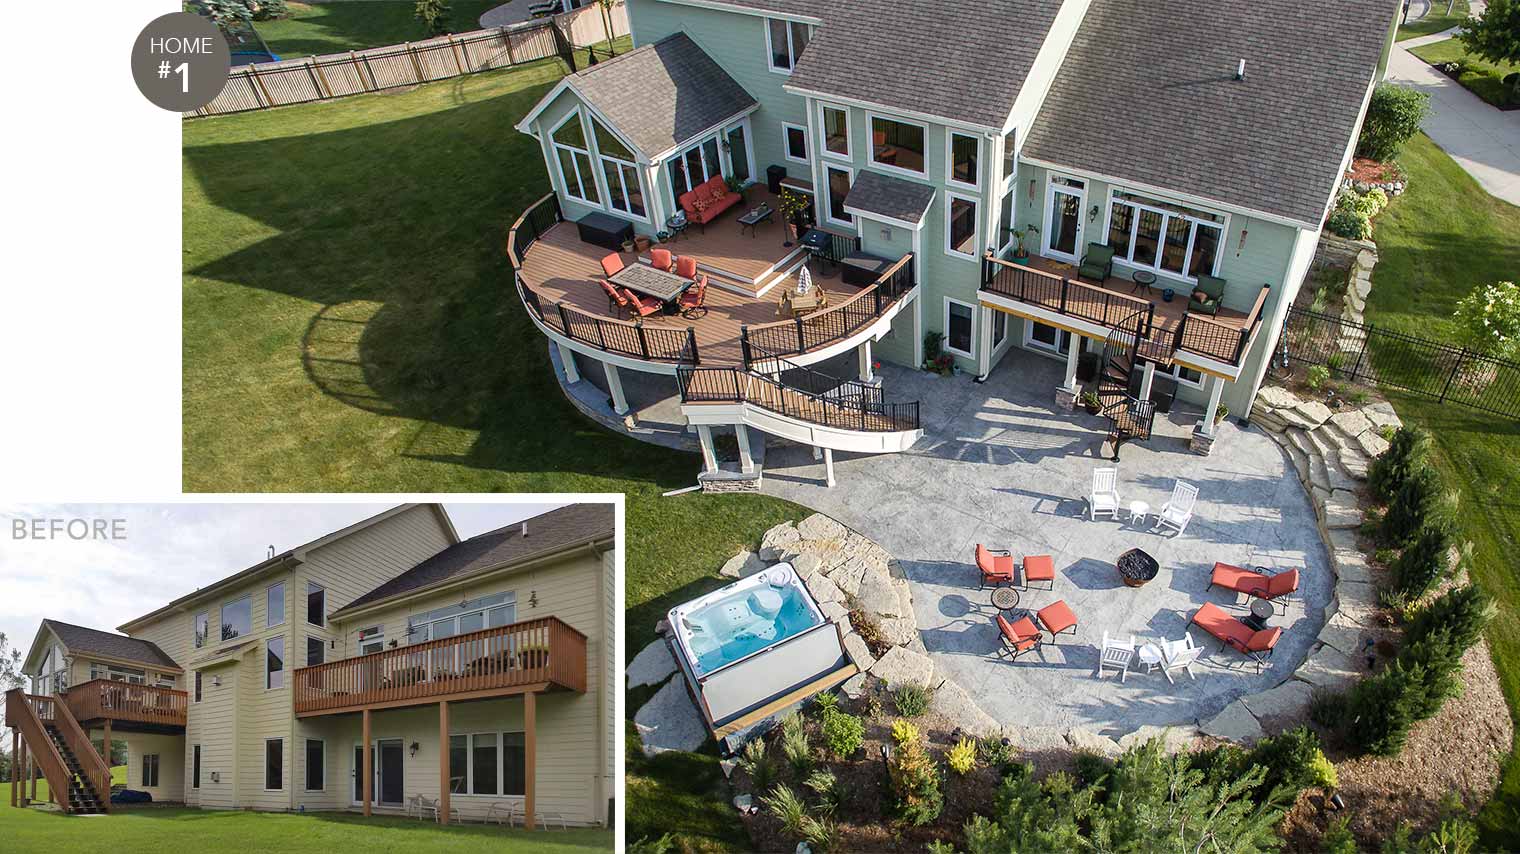 2017 Tour of Remodeled Homes features this deck, bar, spa and outdoor entertaining area by designer remodeler Silent Rivers of Des Moines, Iowa